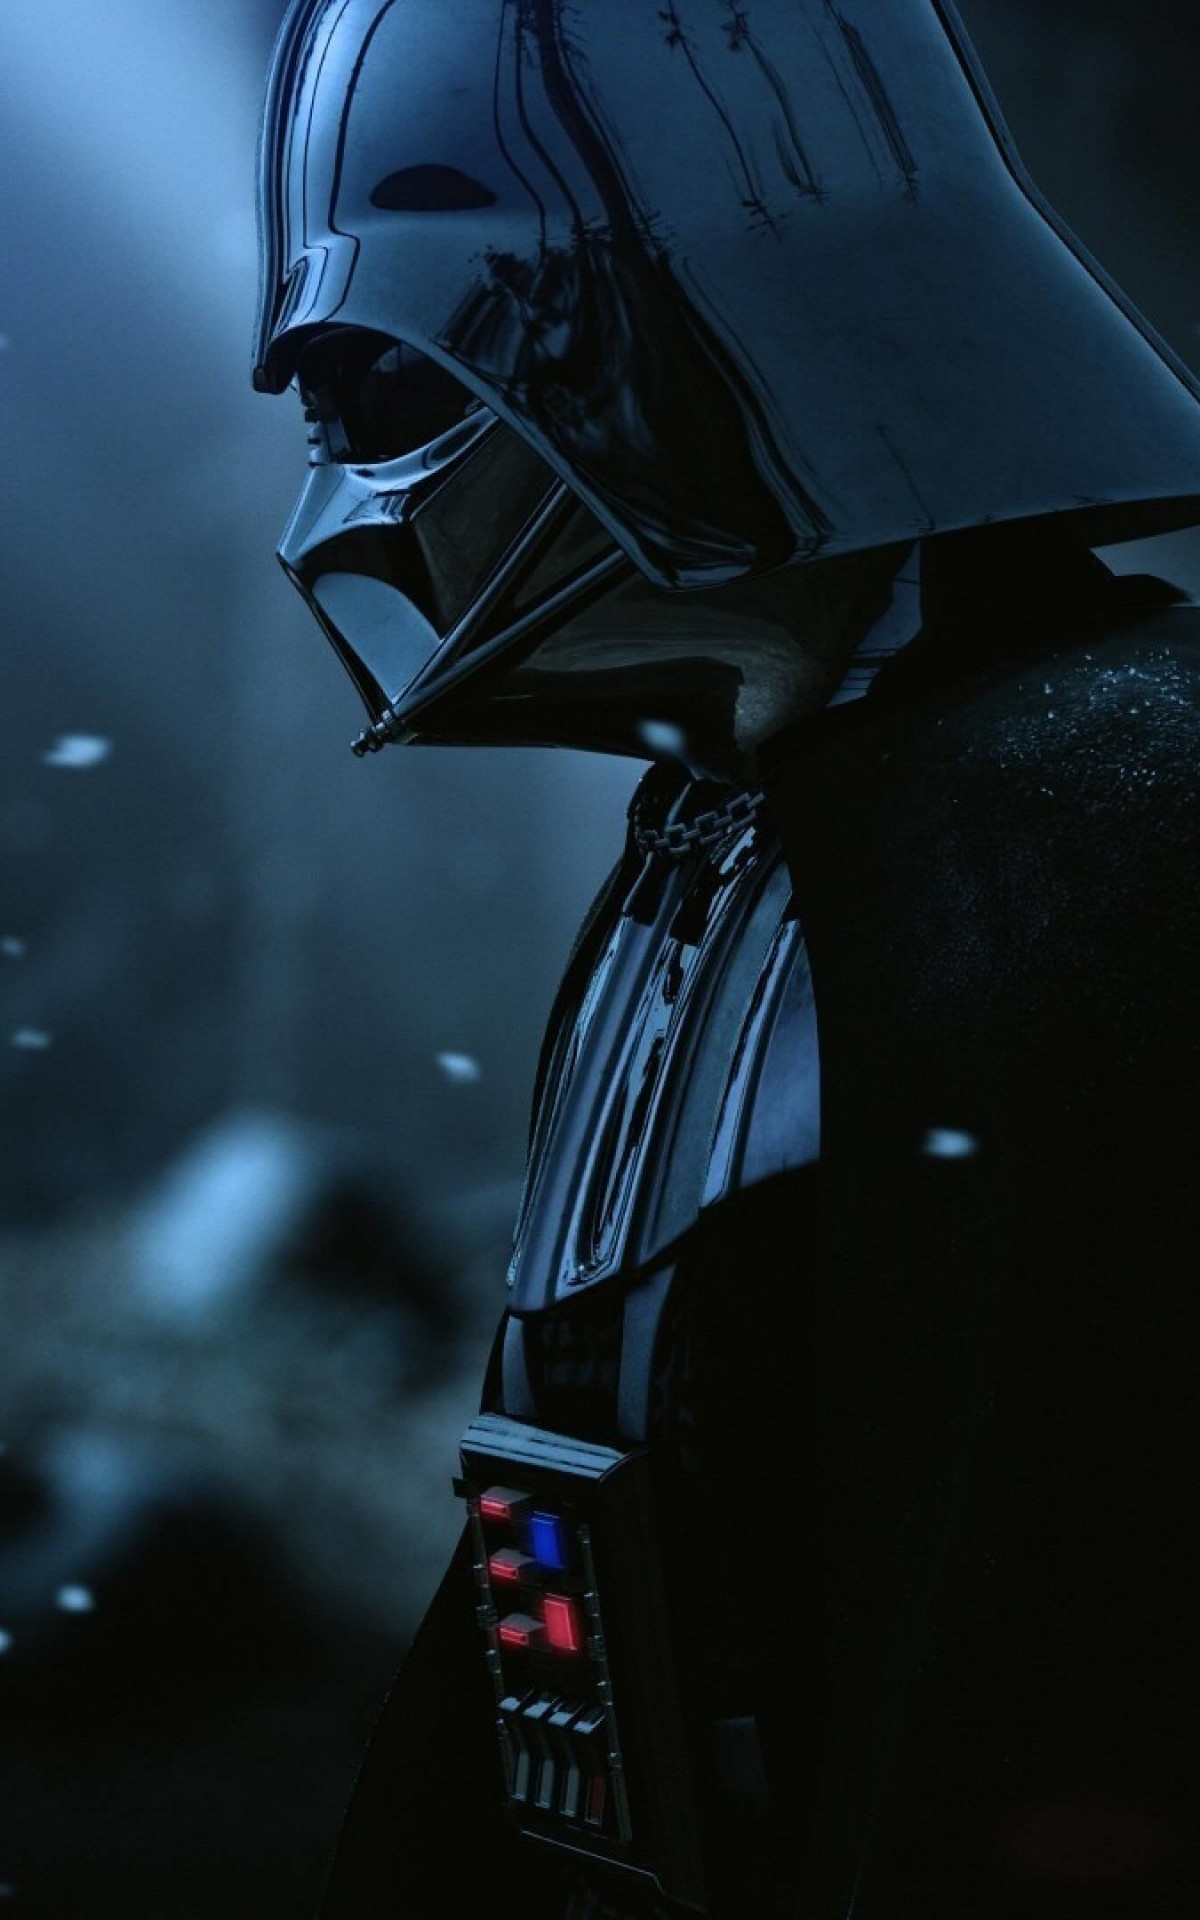 Darth Vader - The Force Unleashed 2 Wallpaper for Amazon Kindle Fire HDX